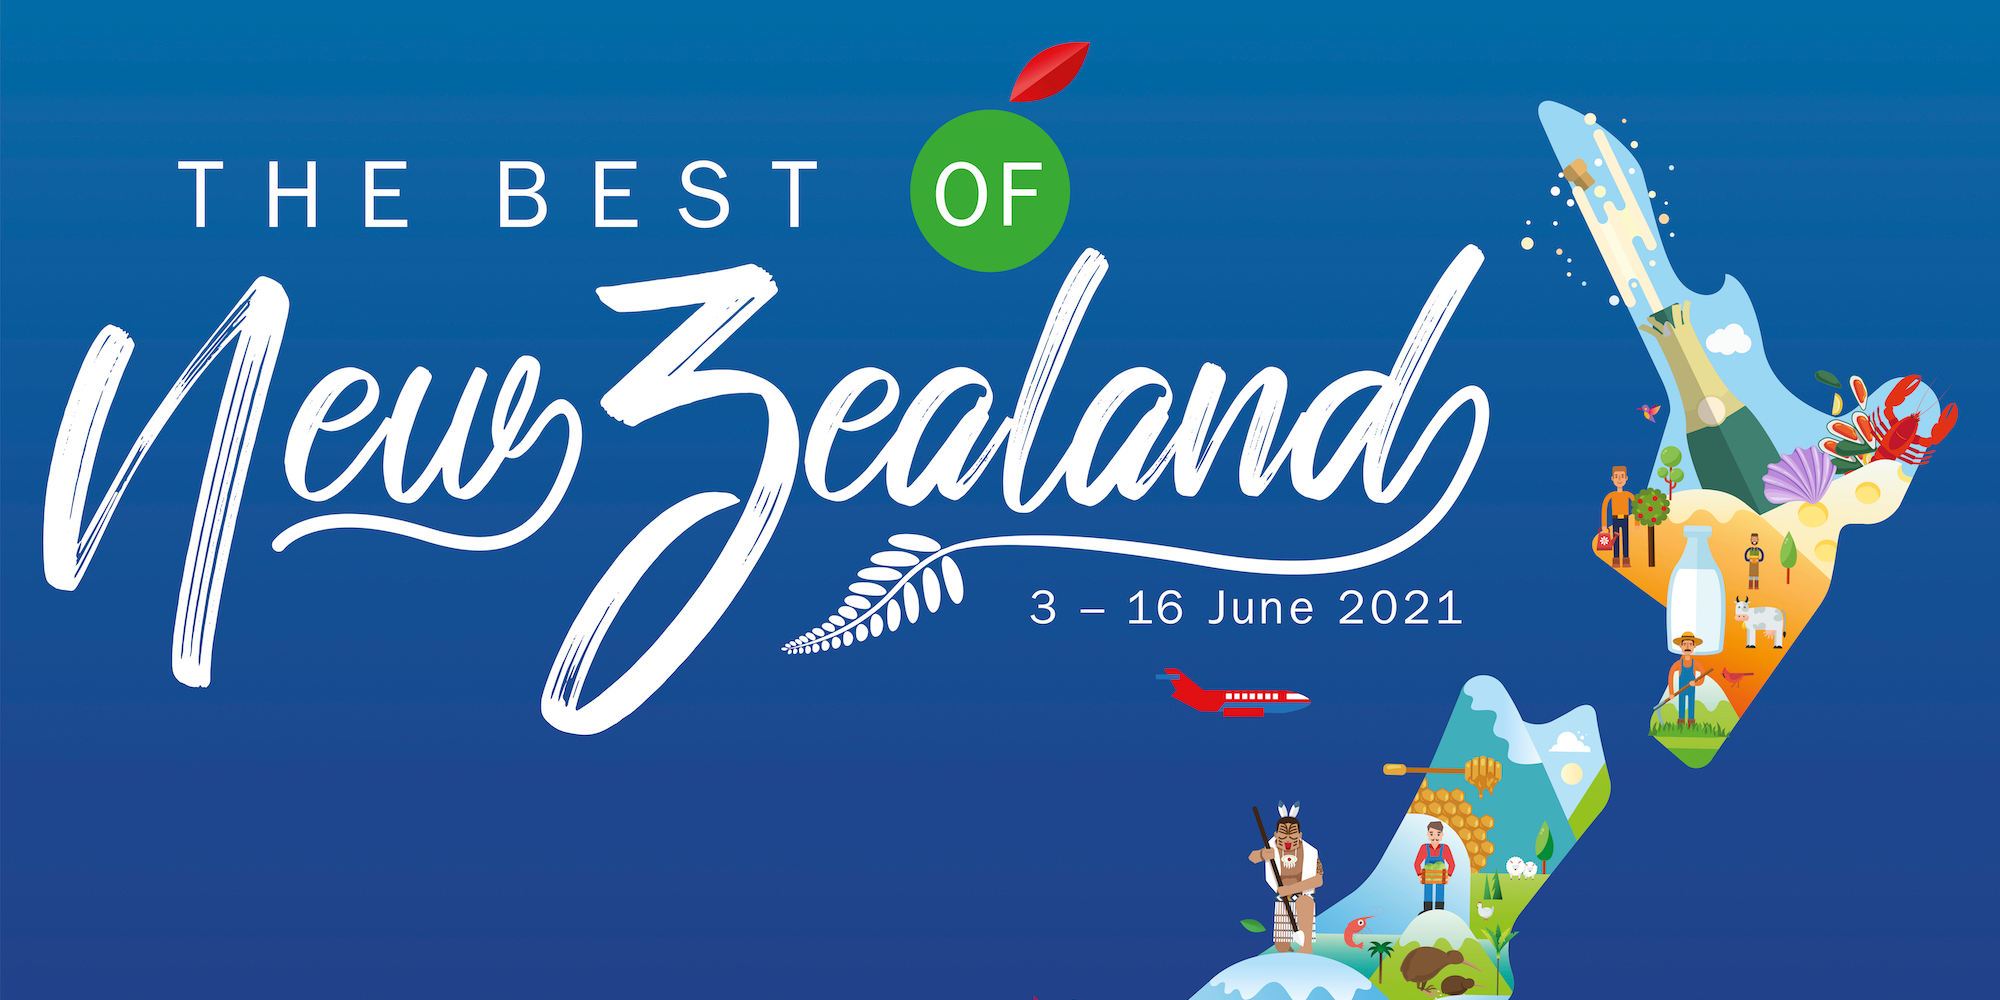 Enjoy New Zealand’s finest produce at home with the Best of New Zealand Fair!